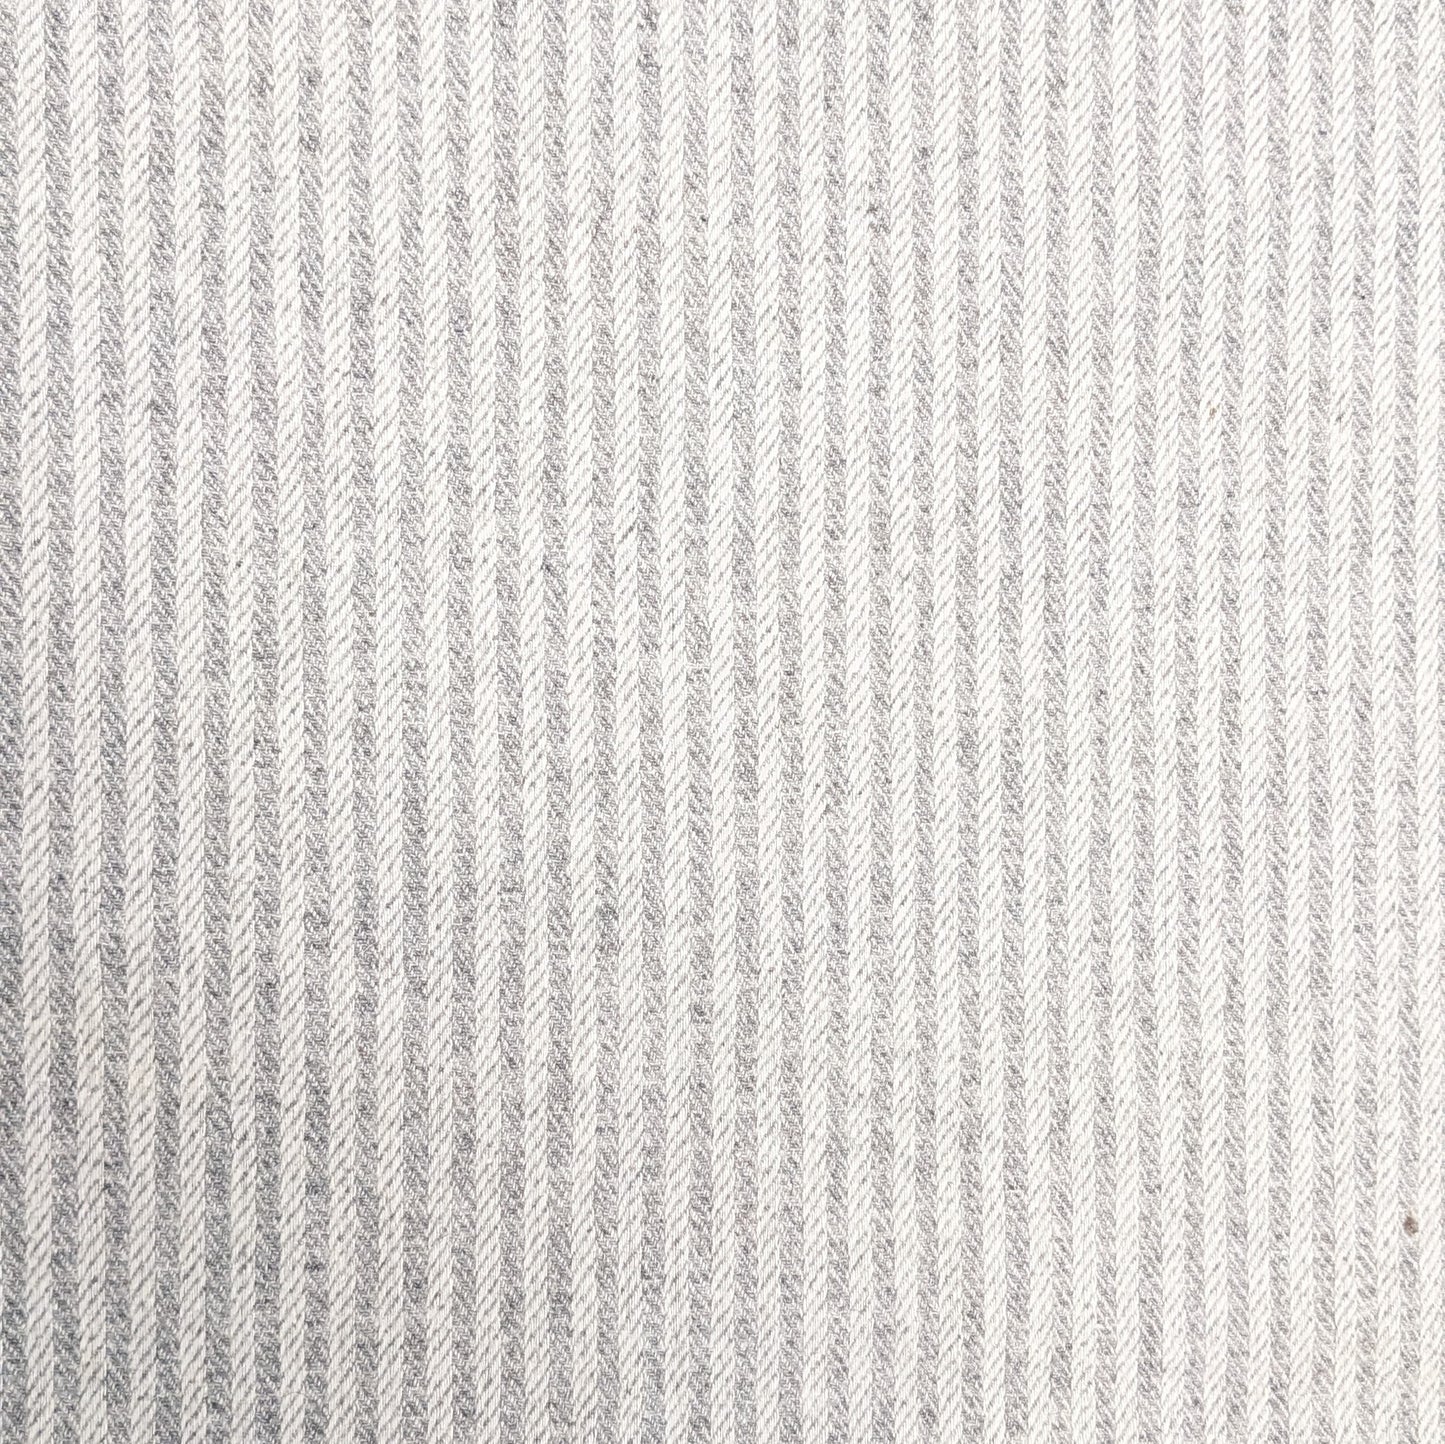 Wool and Polyester Tweed Stripe Fabric - Silver and Cream